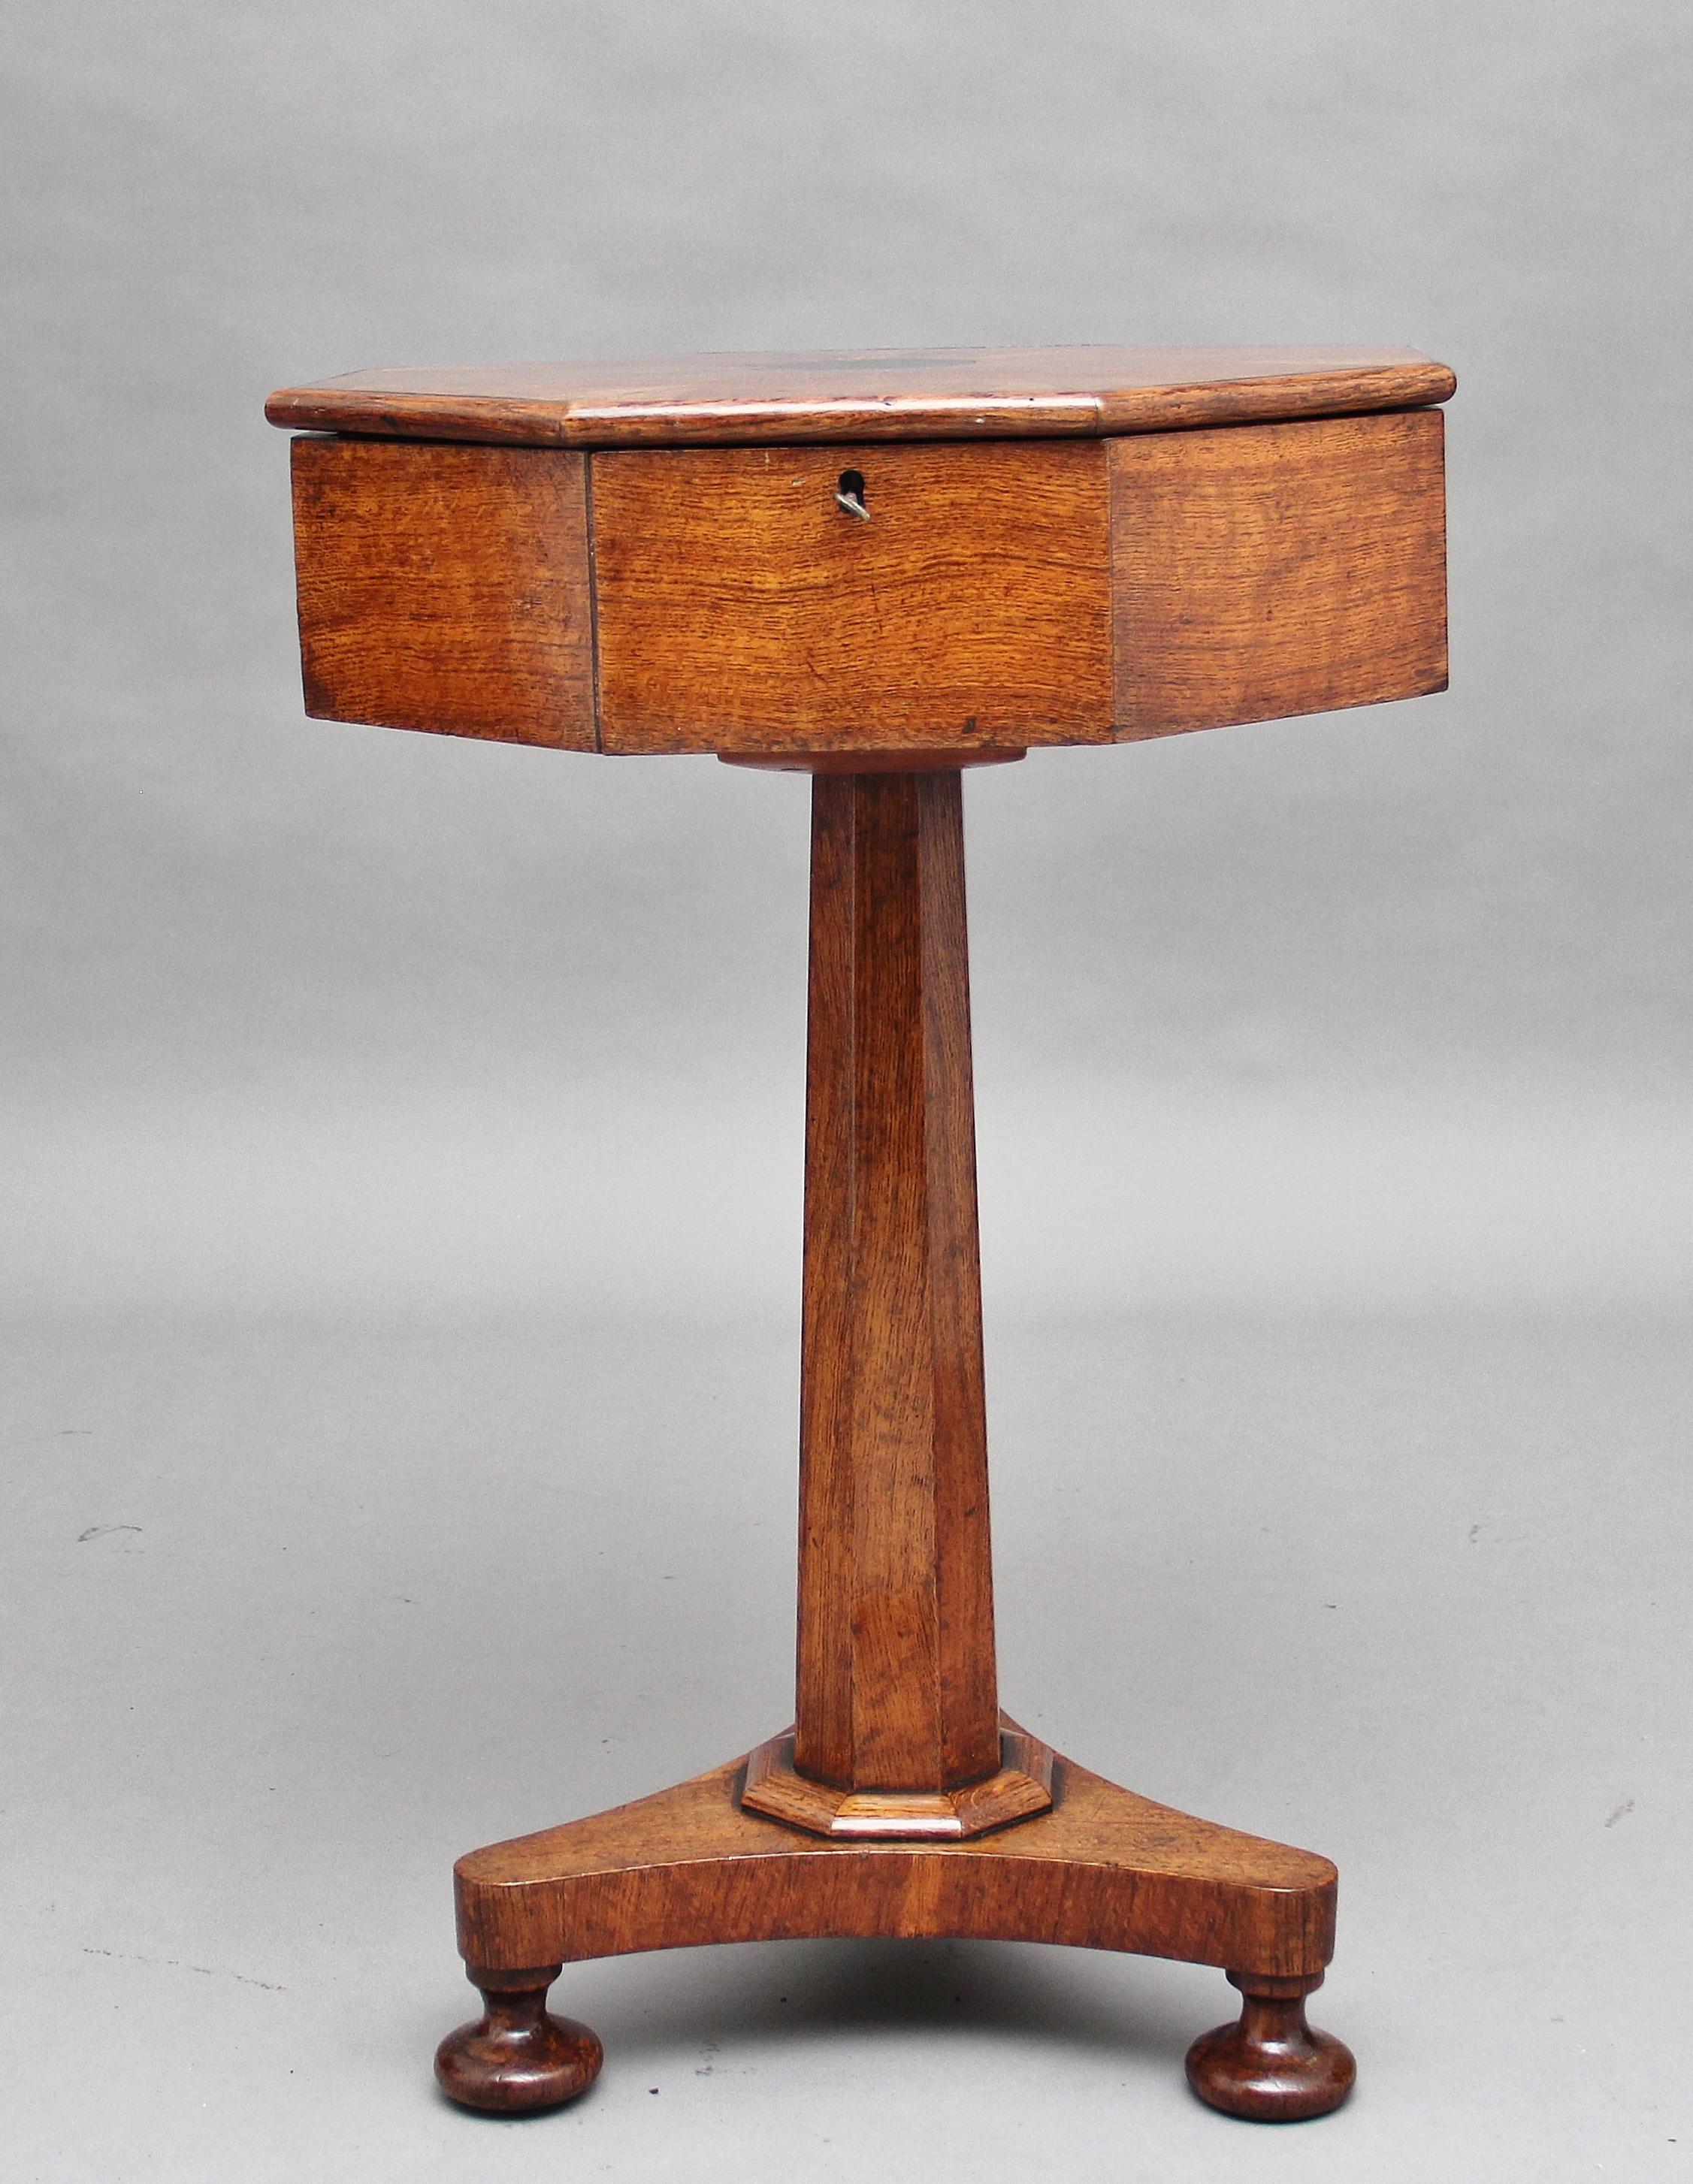 Early Victorian 19th Century Oak Work Table with Segmented Top and Ebony Inlay